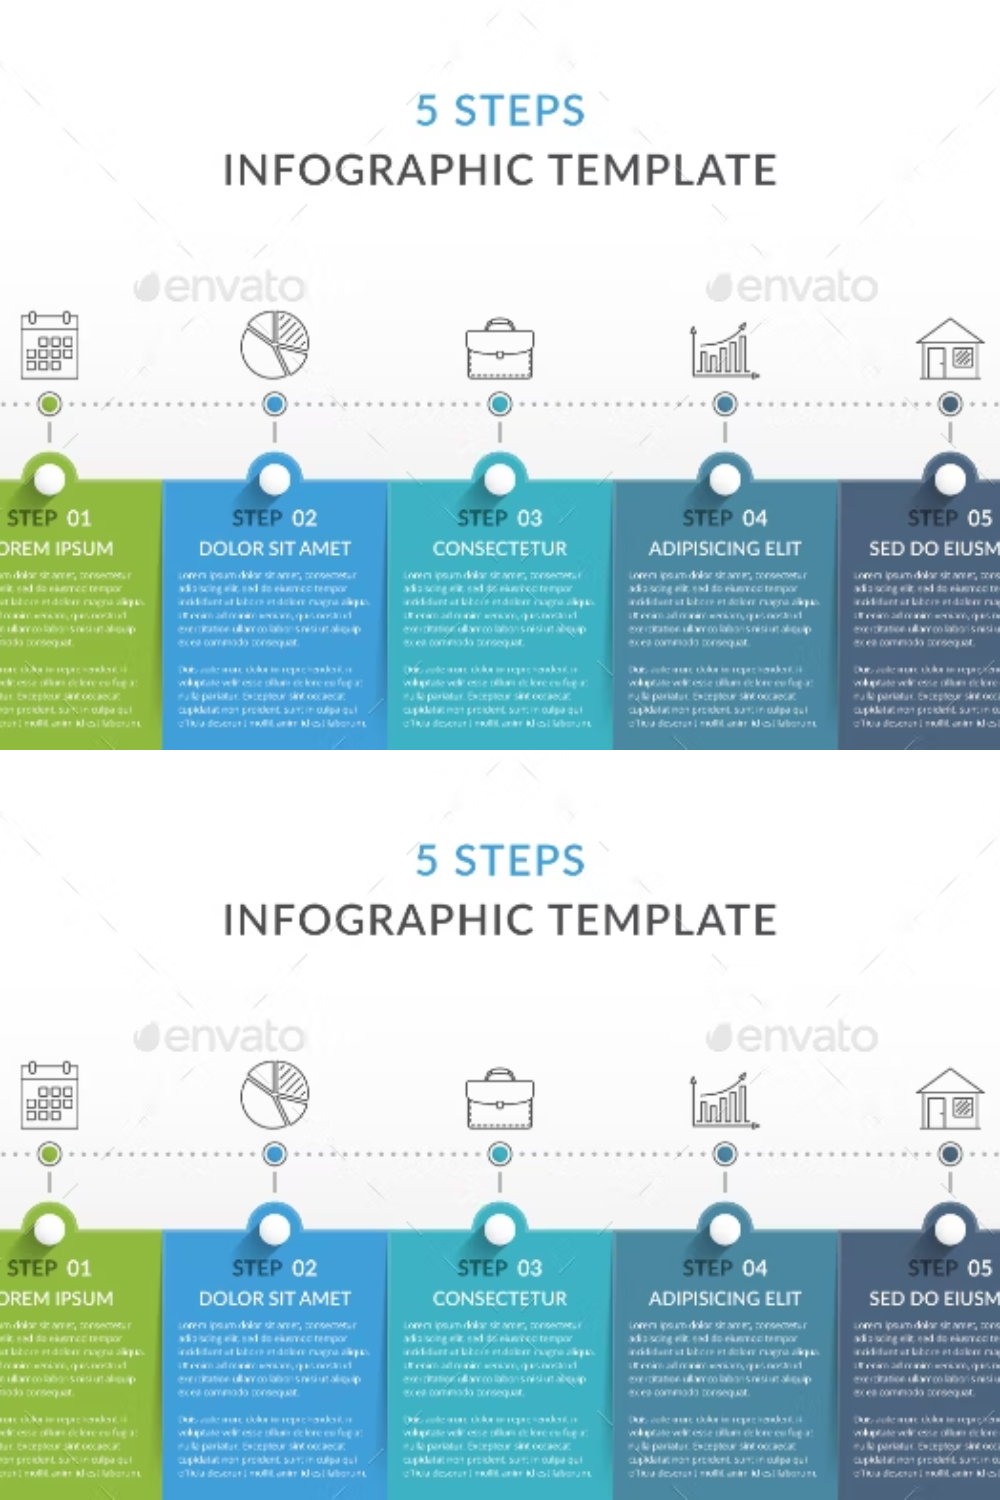 5 Steps - Infographic Template Pinterest Cover.